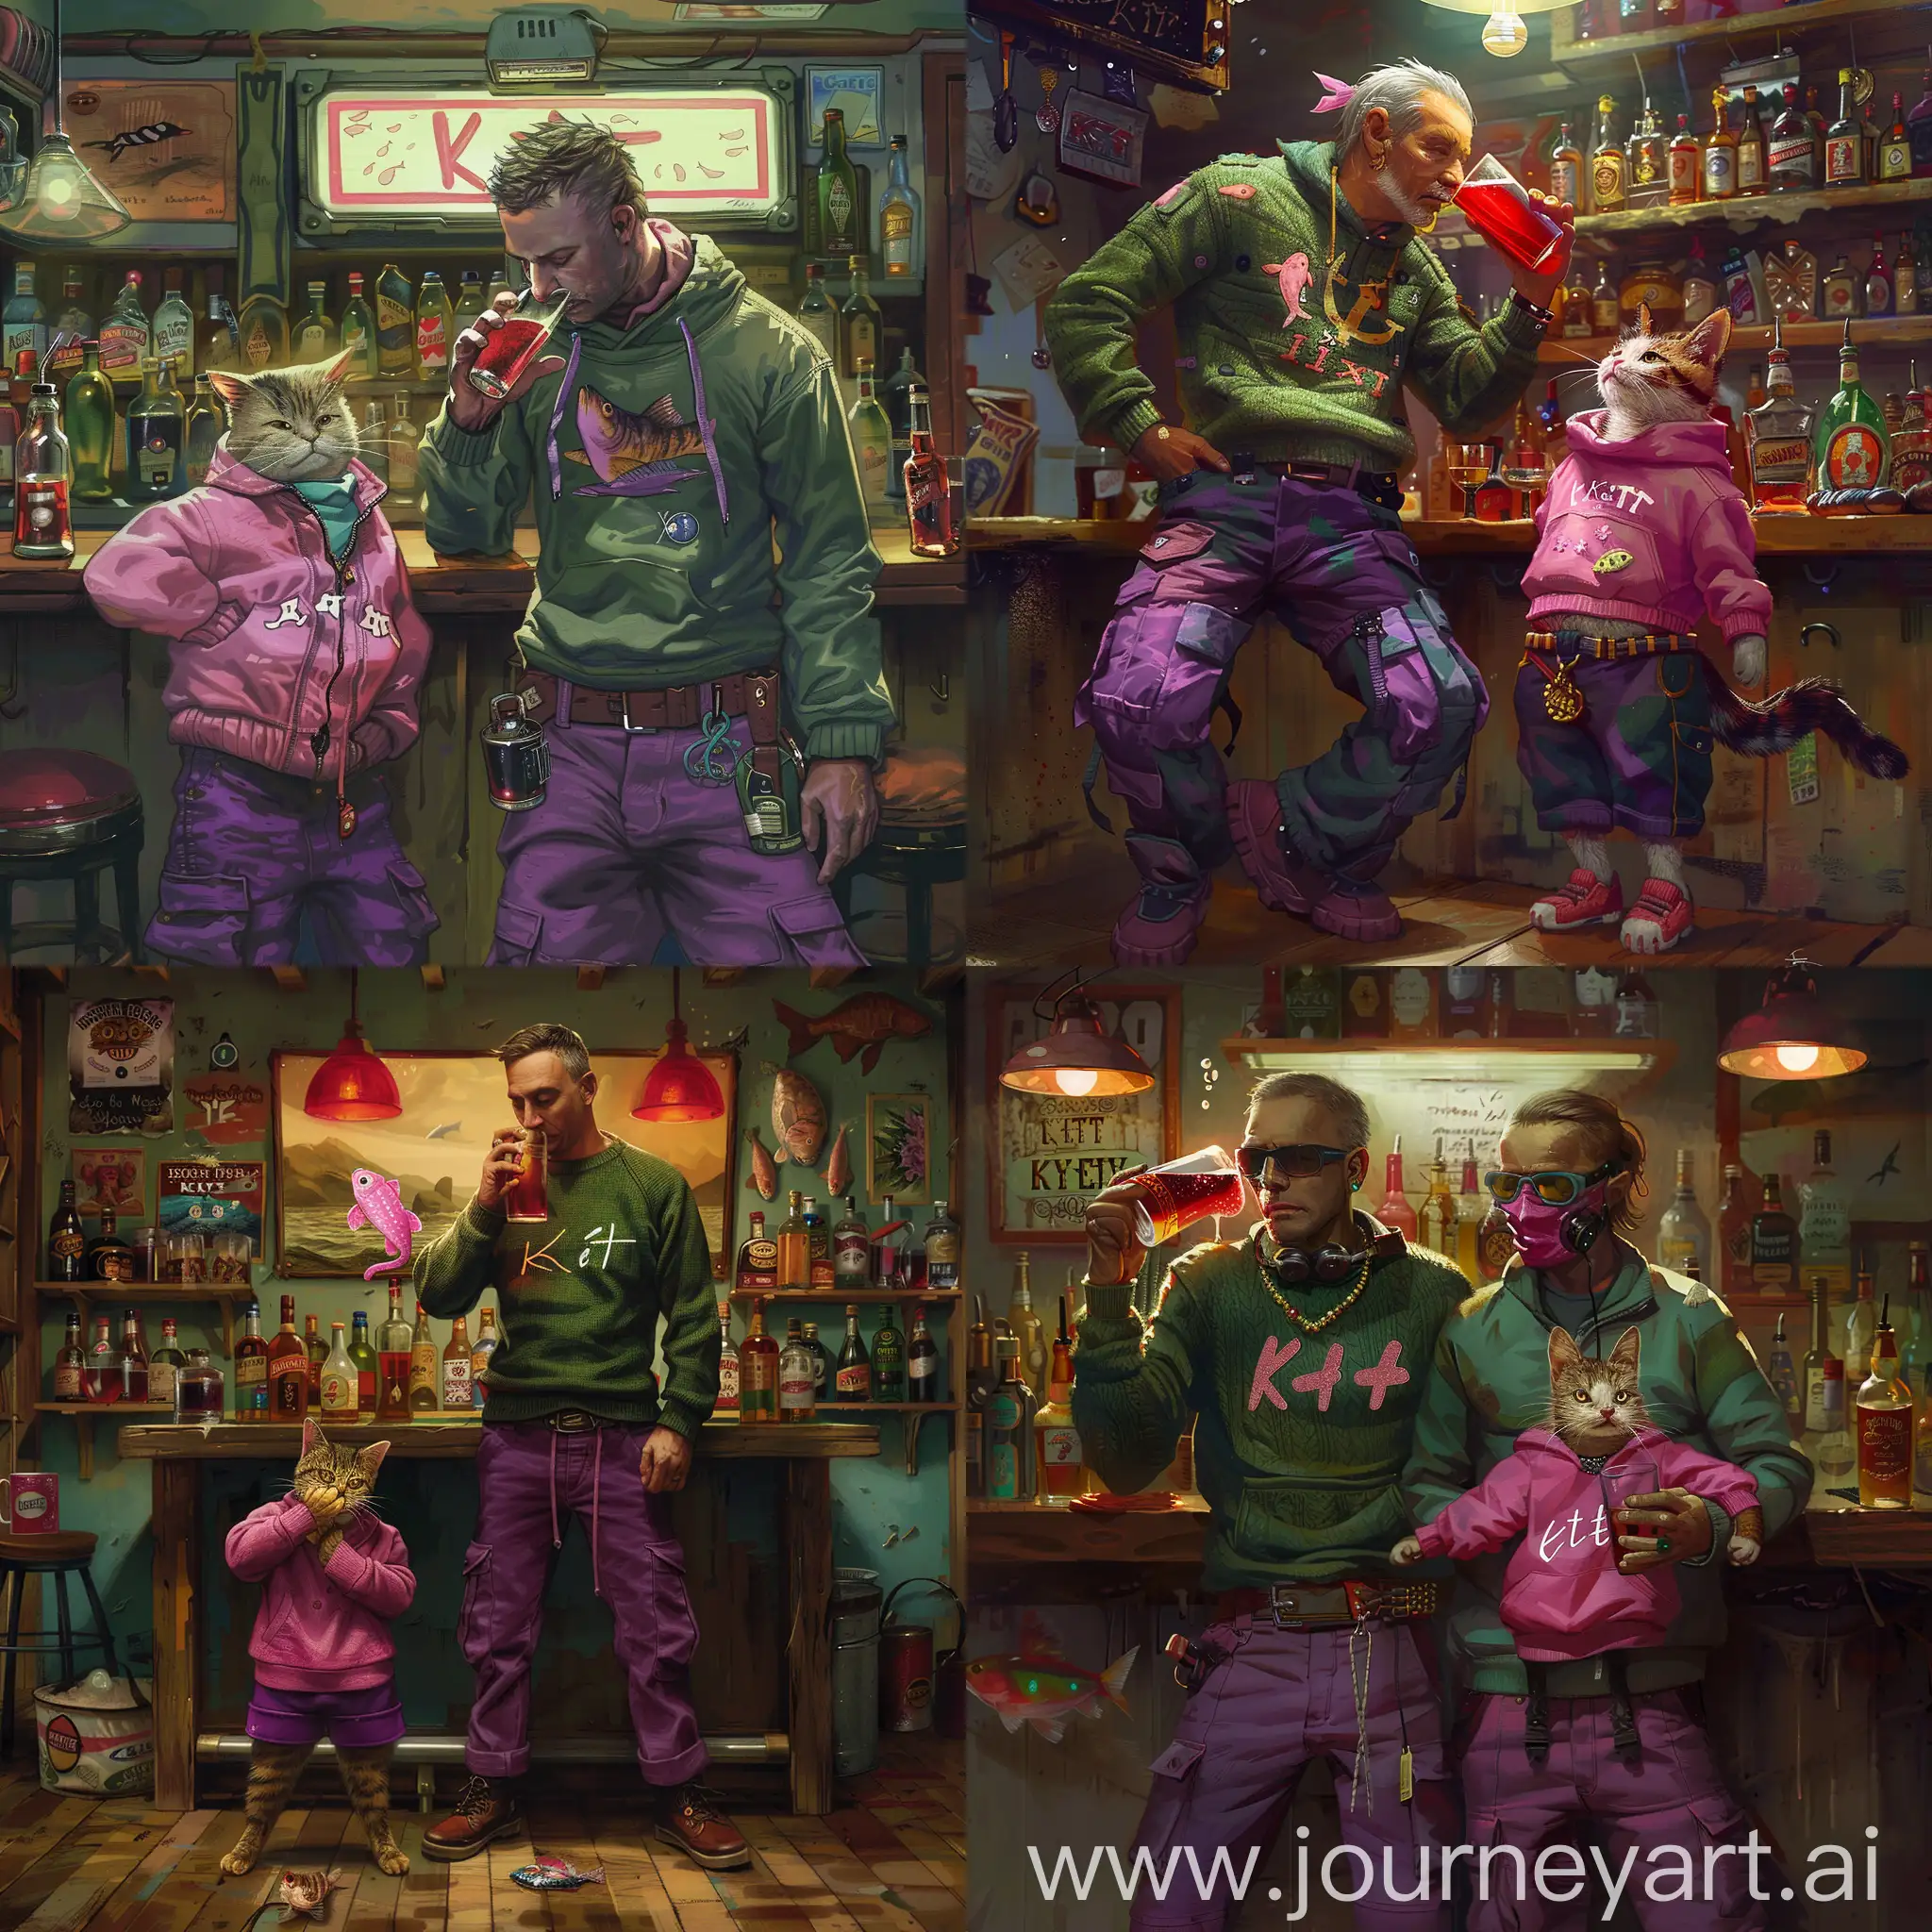 A man with a cat the clothes cat are pink fish and kitti the clothes man are green sweater and purple cargo and the man drinka a alkol the color alkol is red in the bar, And write the name kitty on the cat's clothes.